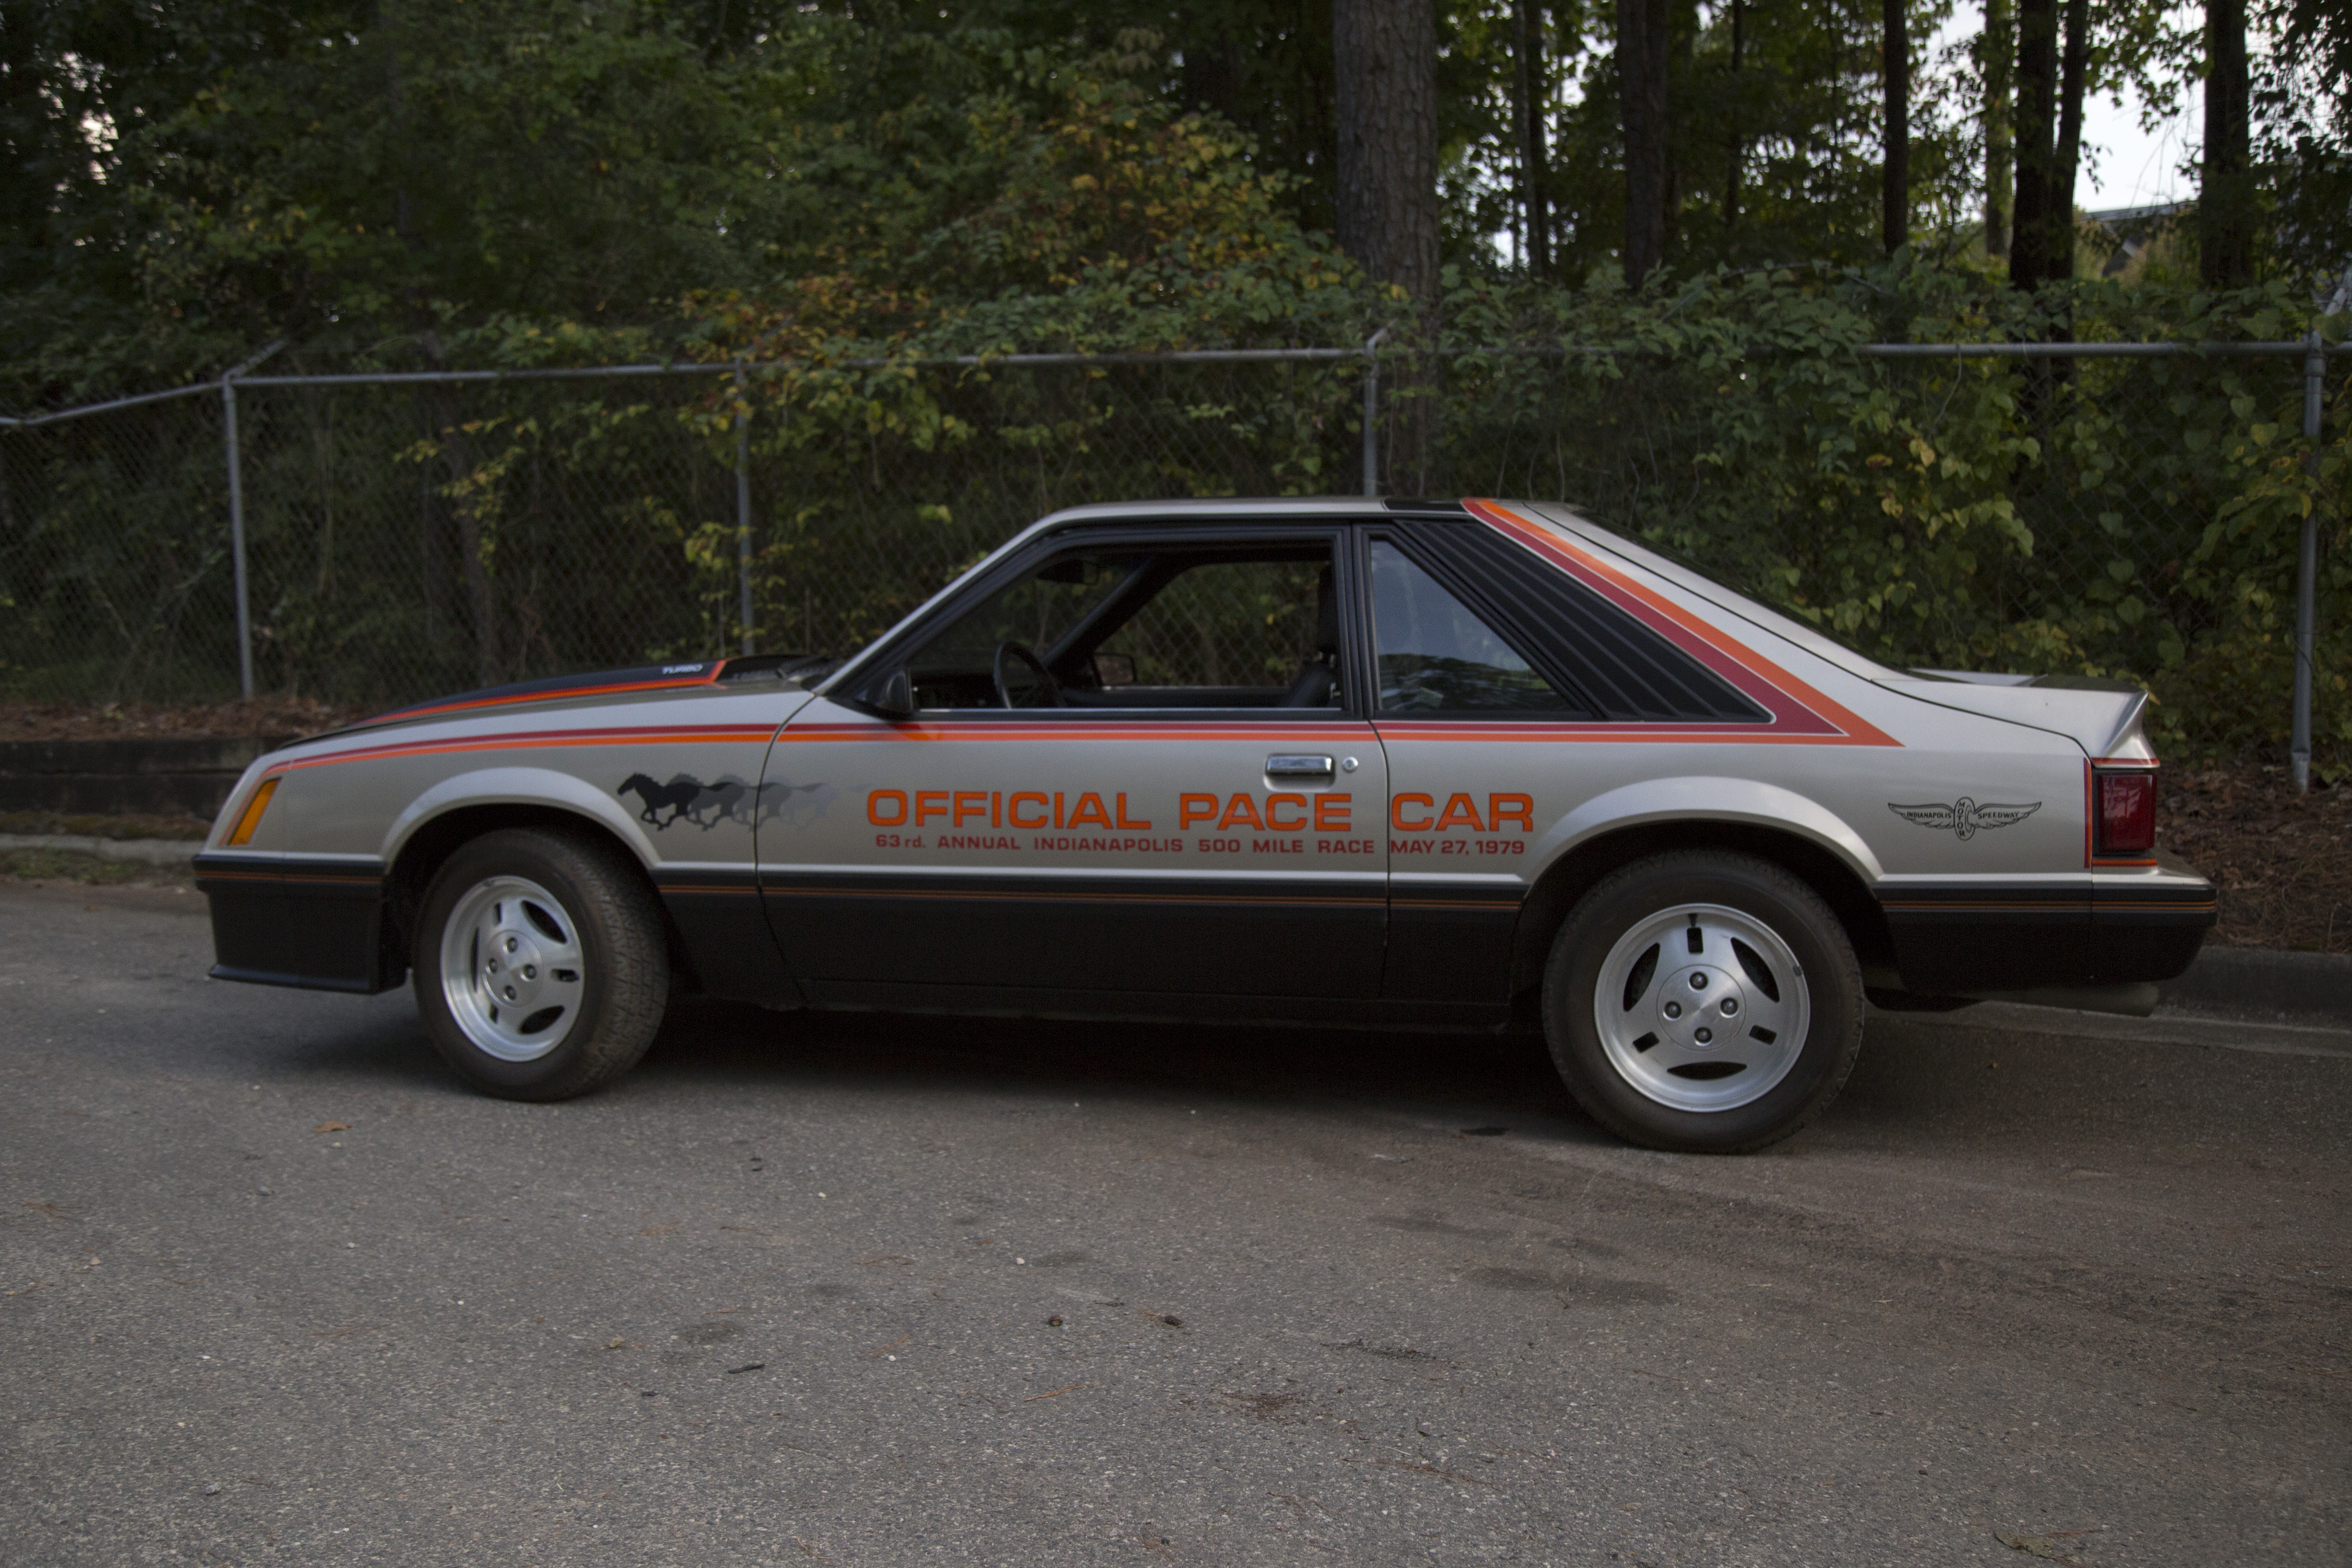 1979 Mustang Indy Pace Car History And Specifications